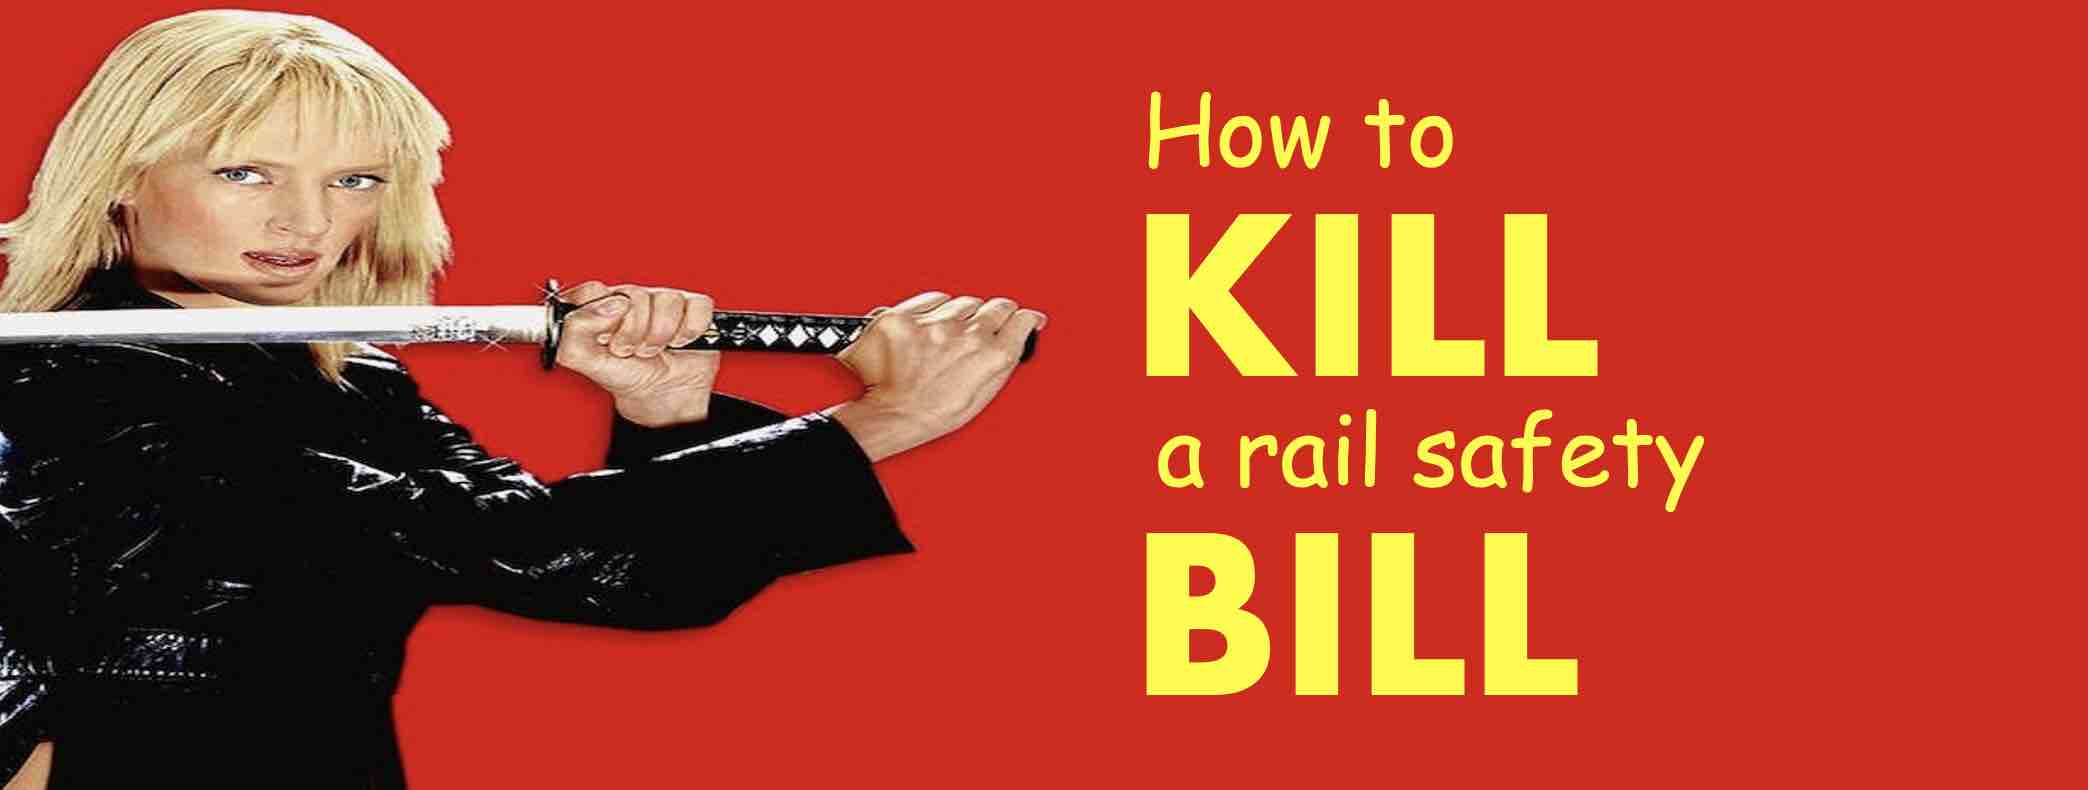 Follow the money to see how to Kill a Rail Safety Bill